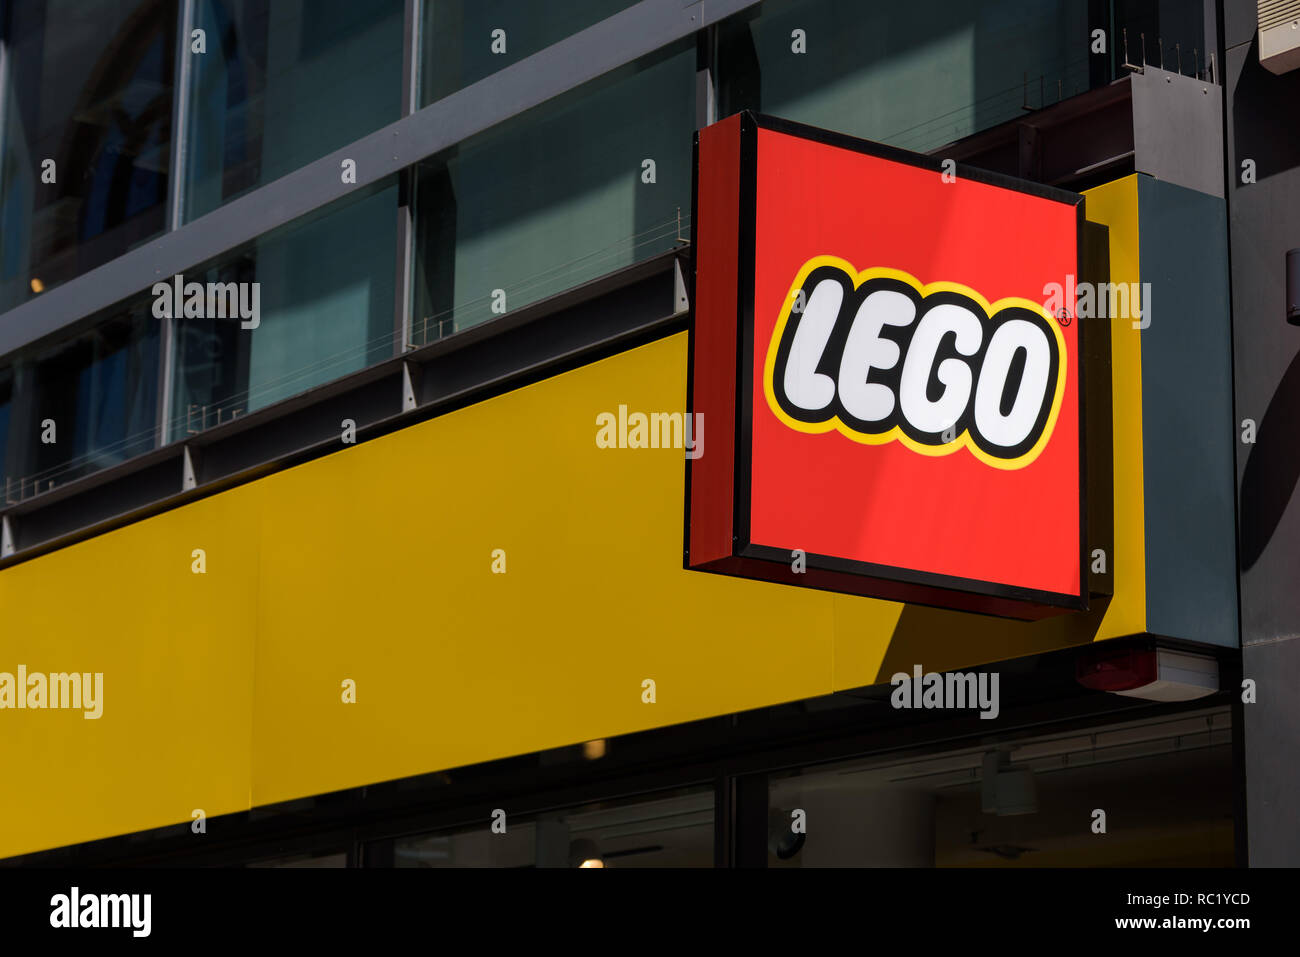 Lego shop in Cologne, Germany. Lego is a line of plastic construction toys that are manufactured by The Lego Group, company based in Billund, Denmark. Stock Photo